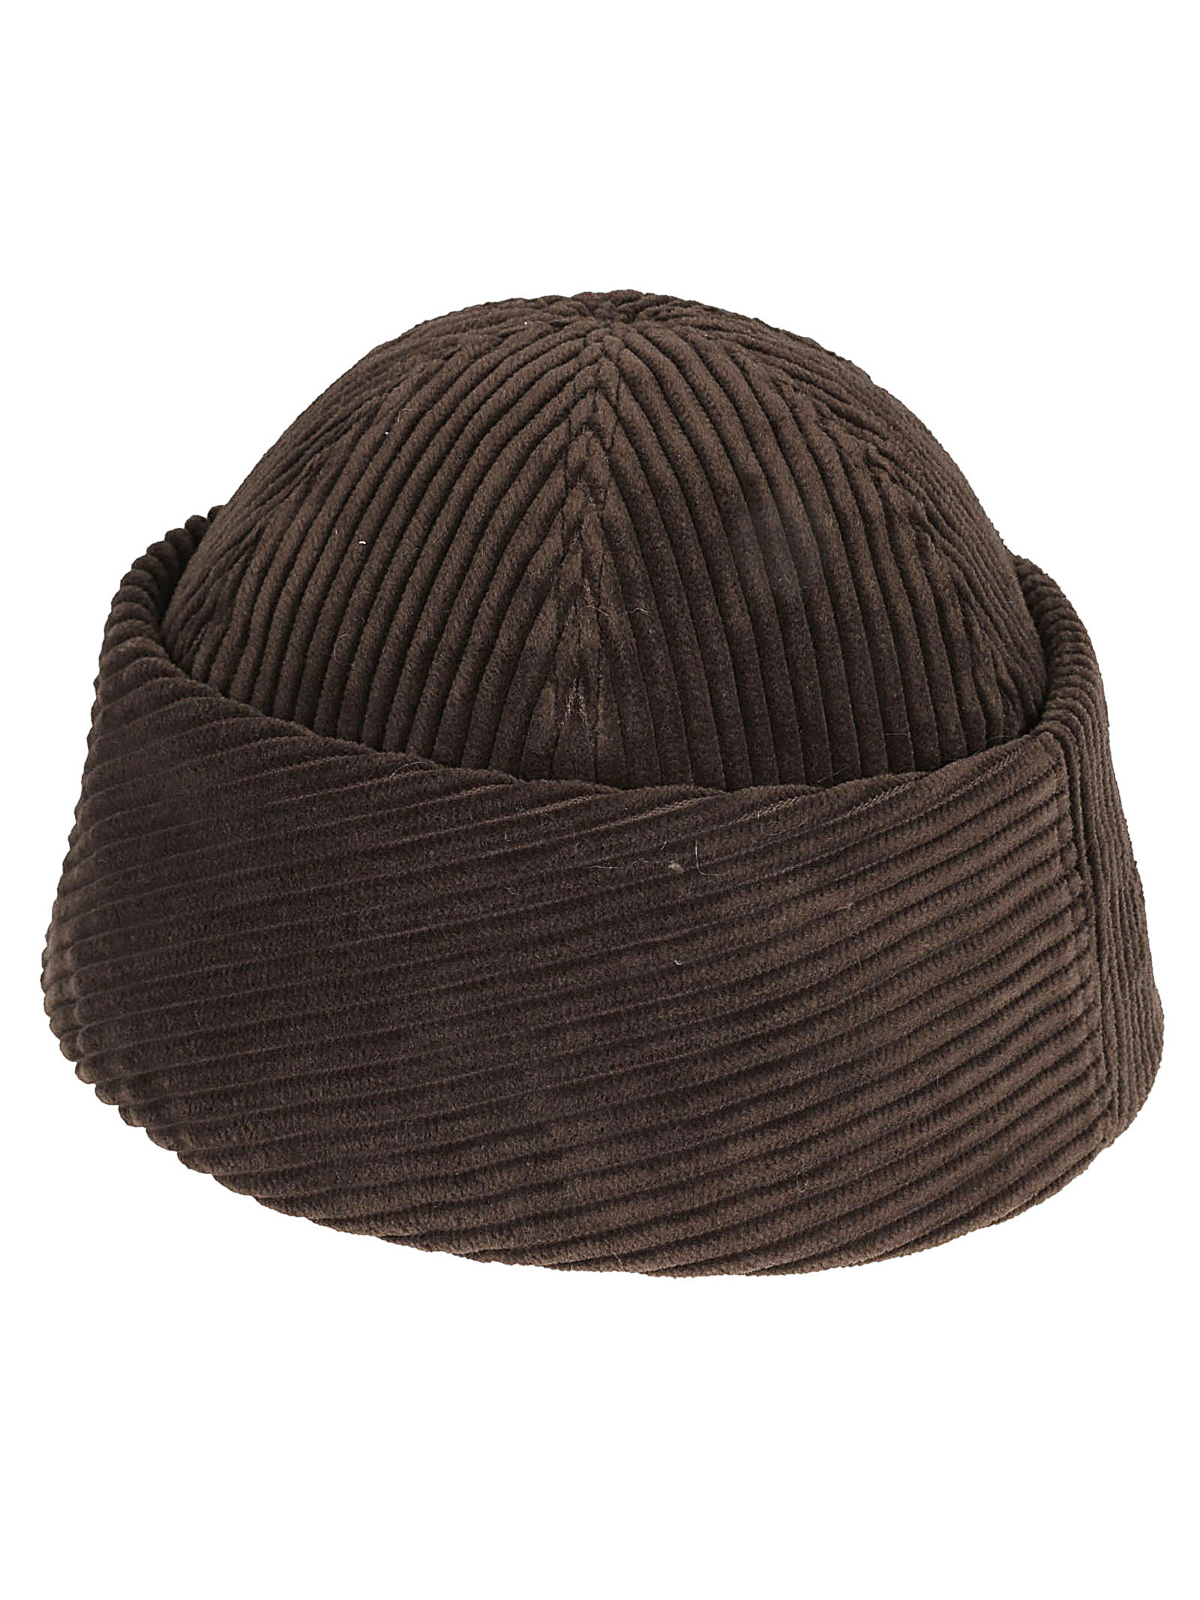 Shop Anthonypeto Sombrero - Marrón In Brown